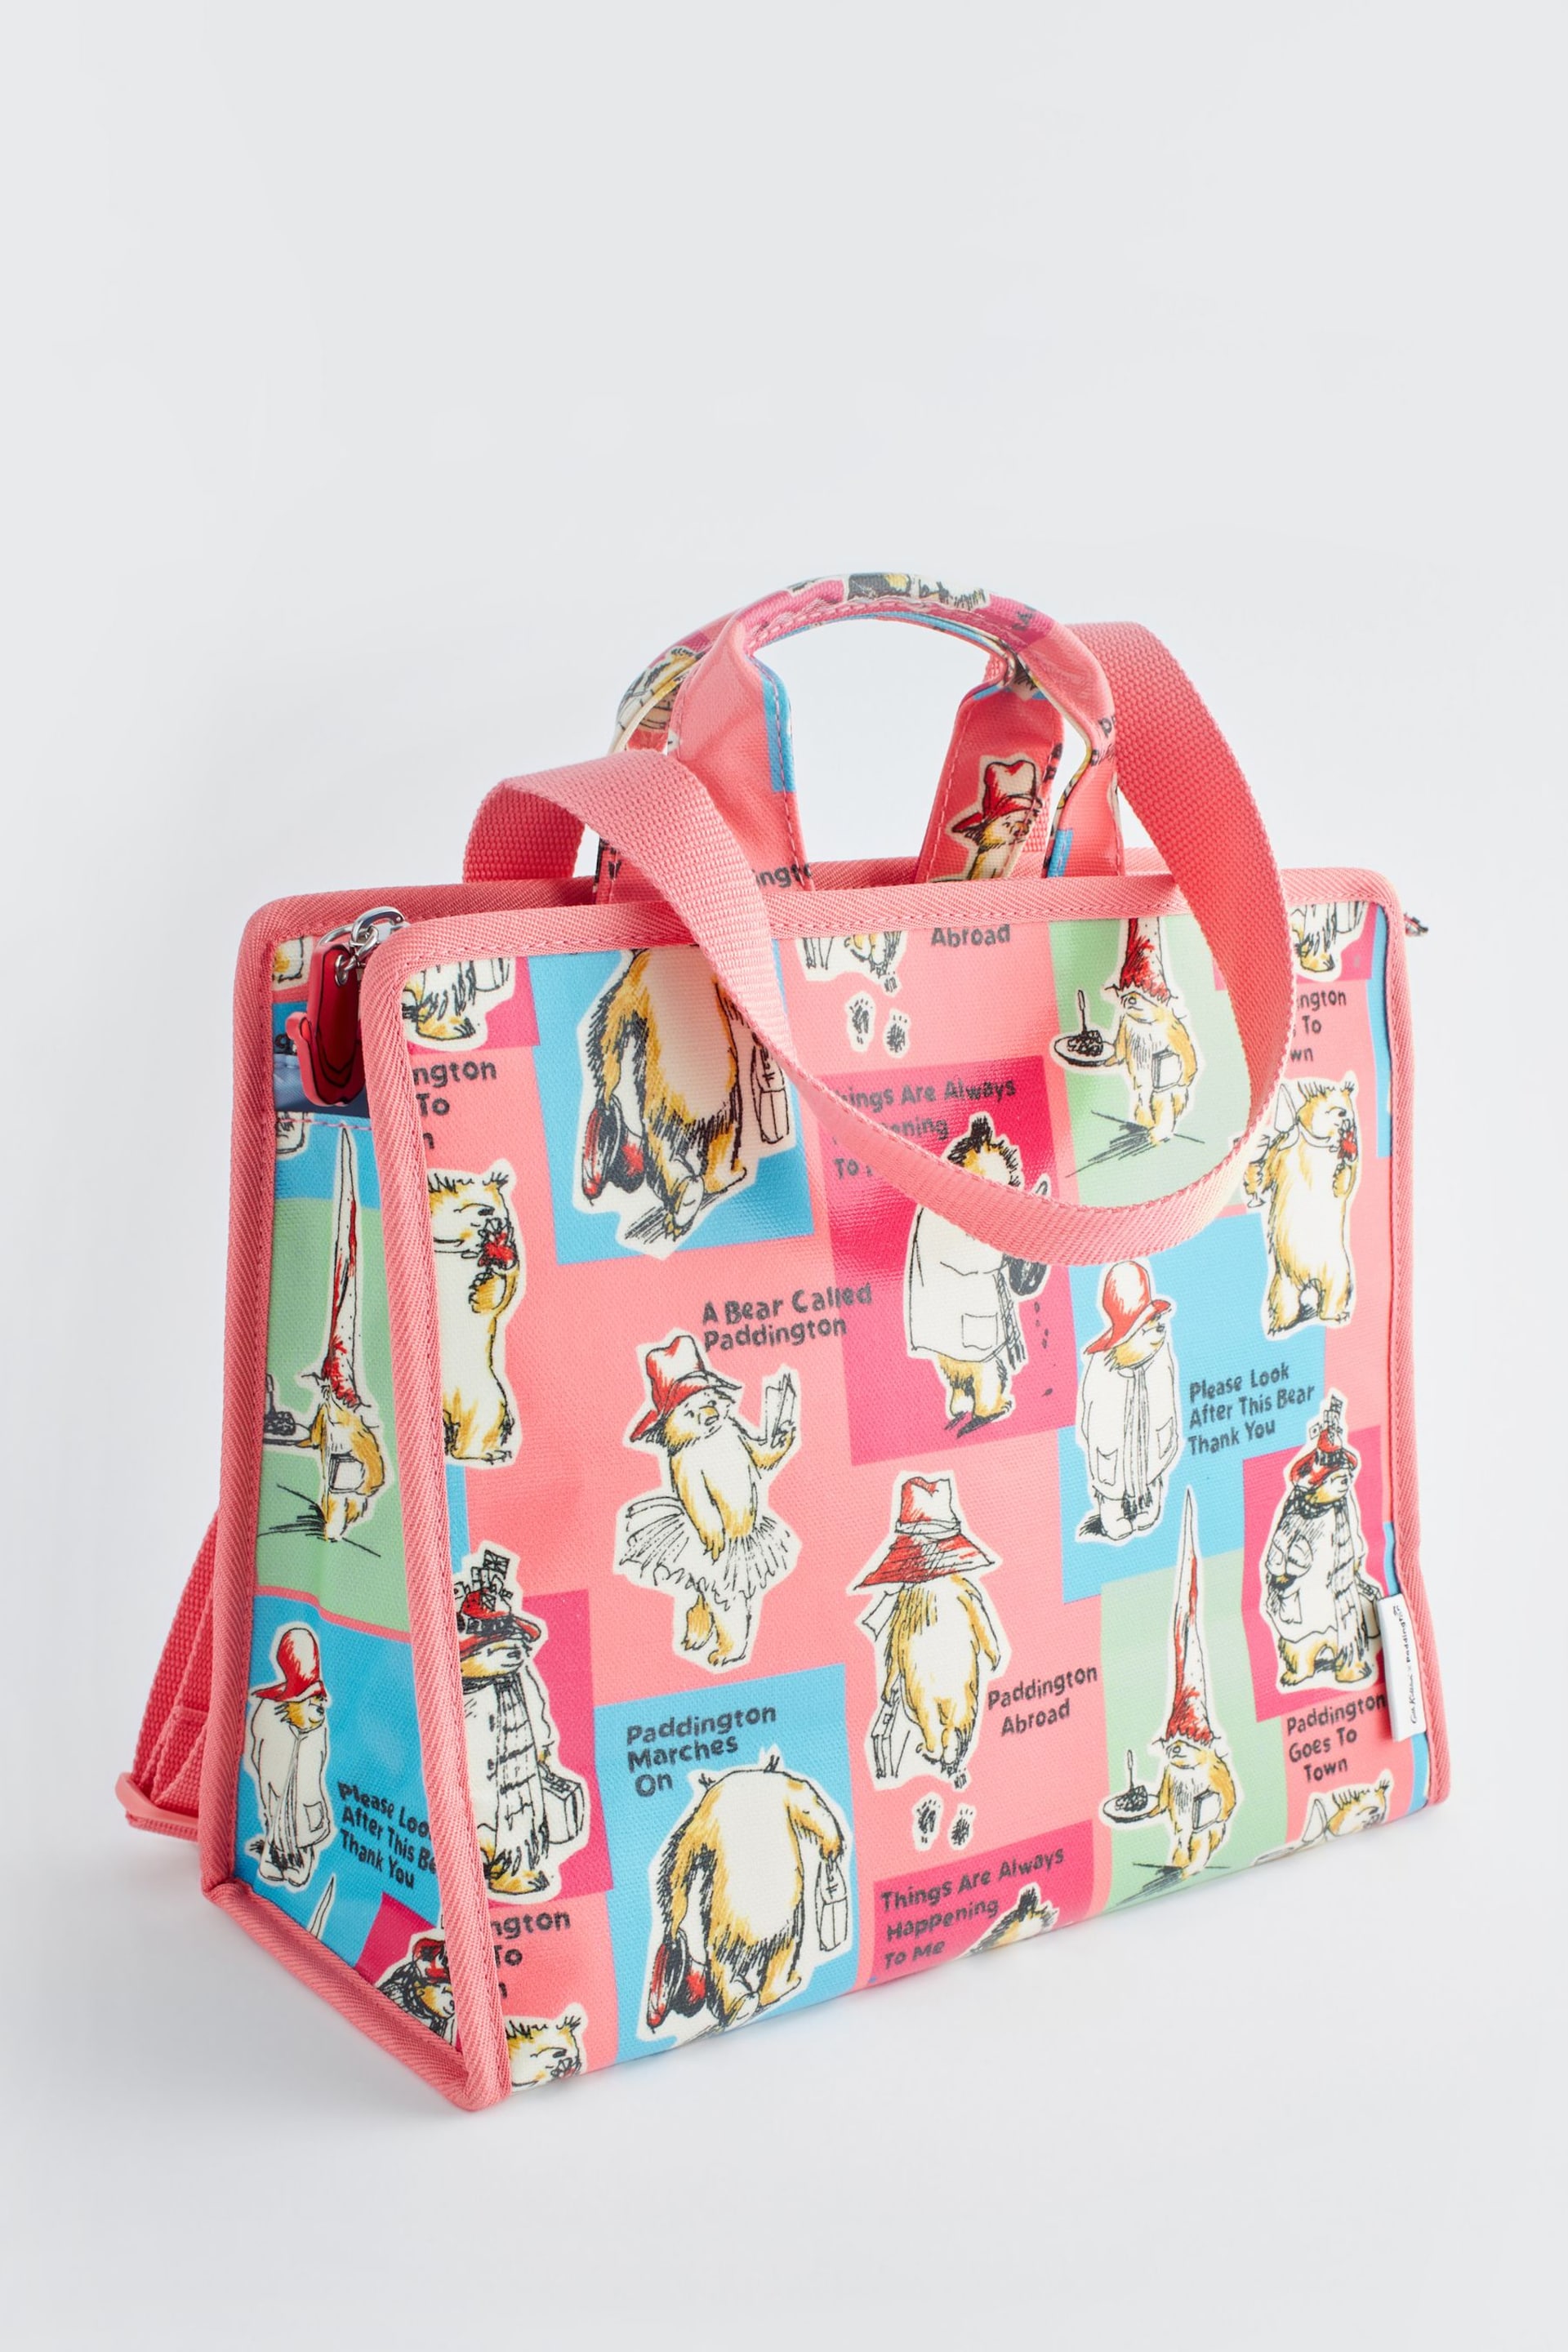 Cath Kidston Pink Paddington 2-In-1 Backpack - Image 6 of 14